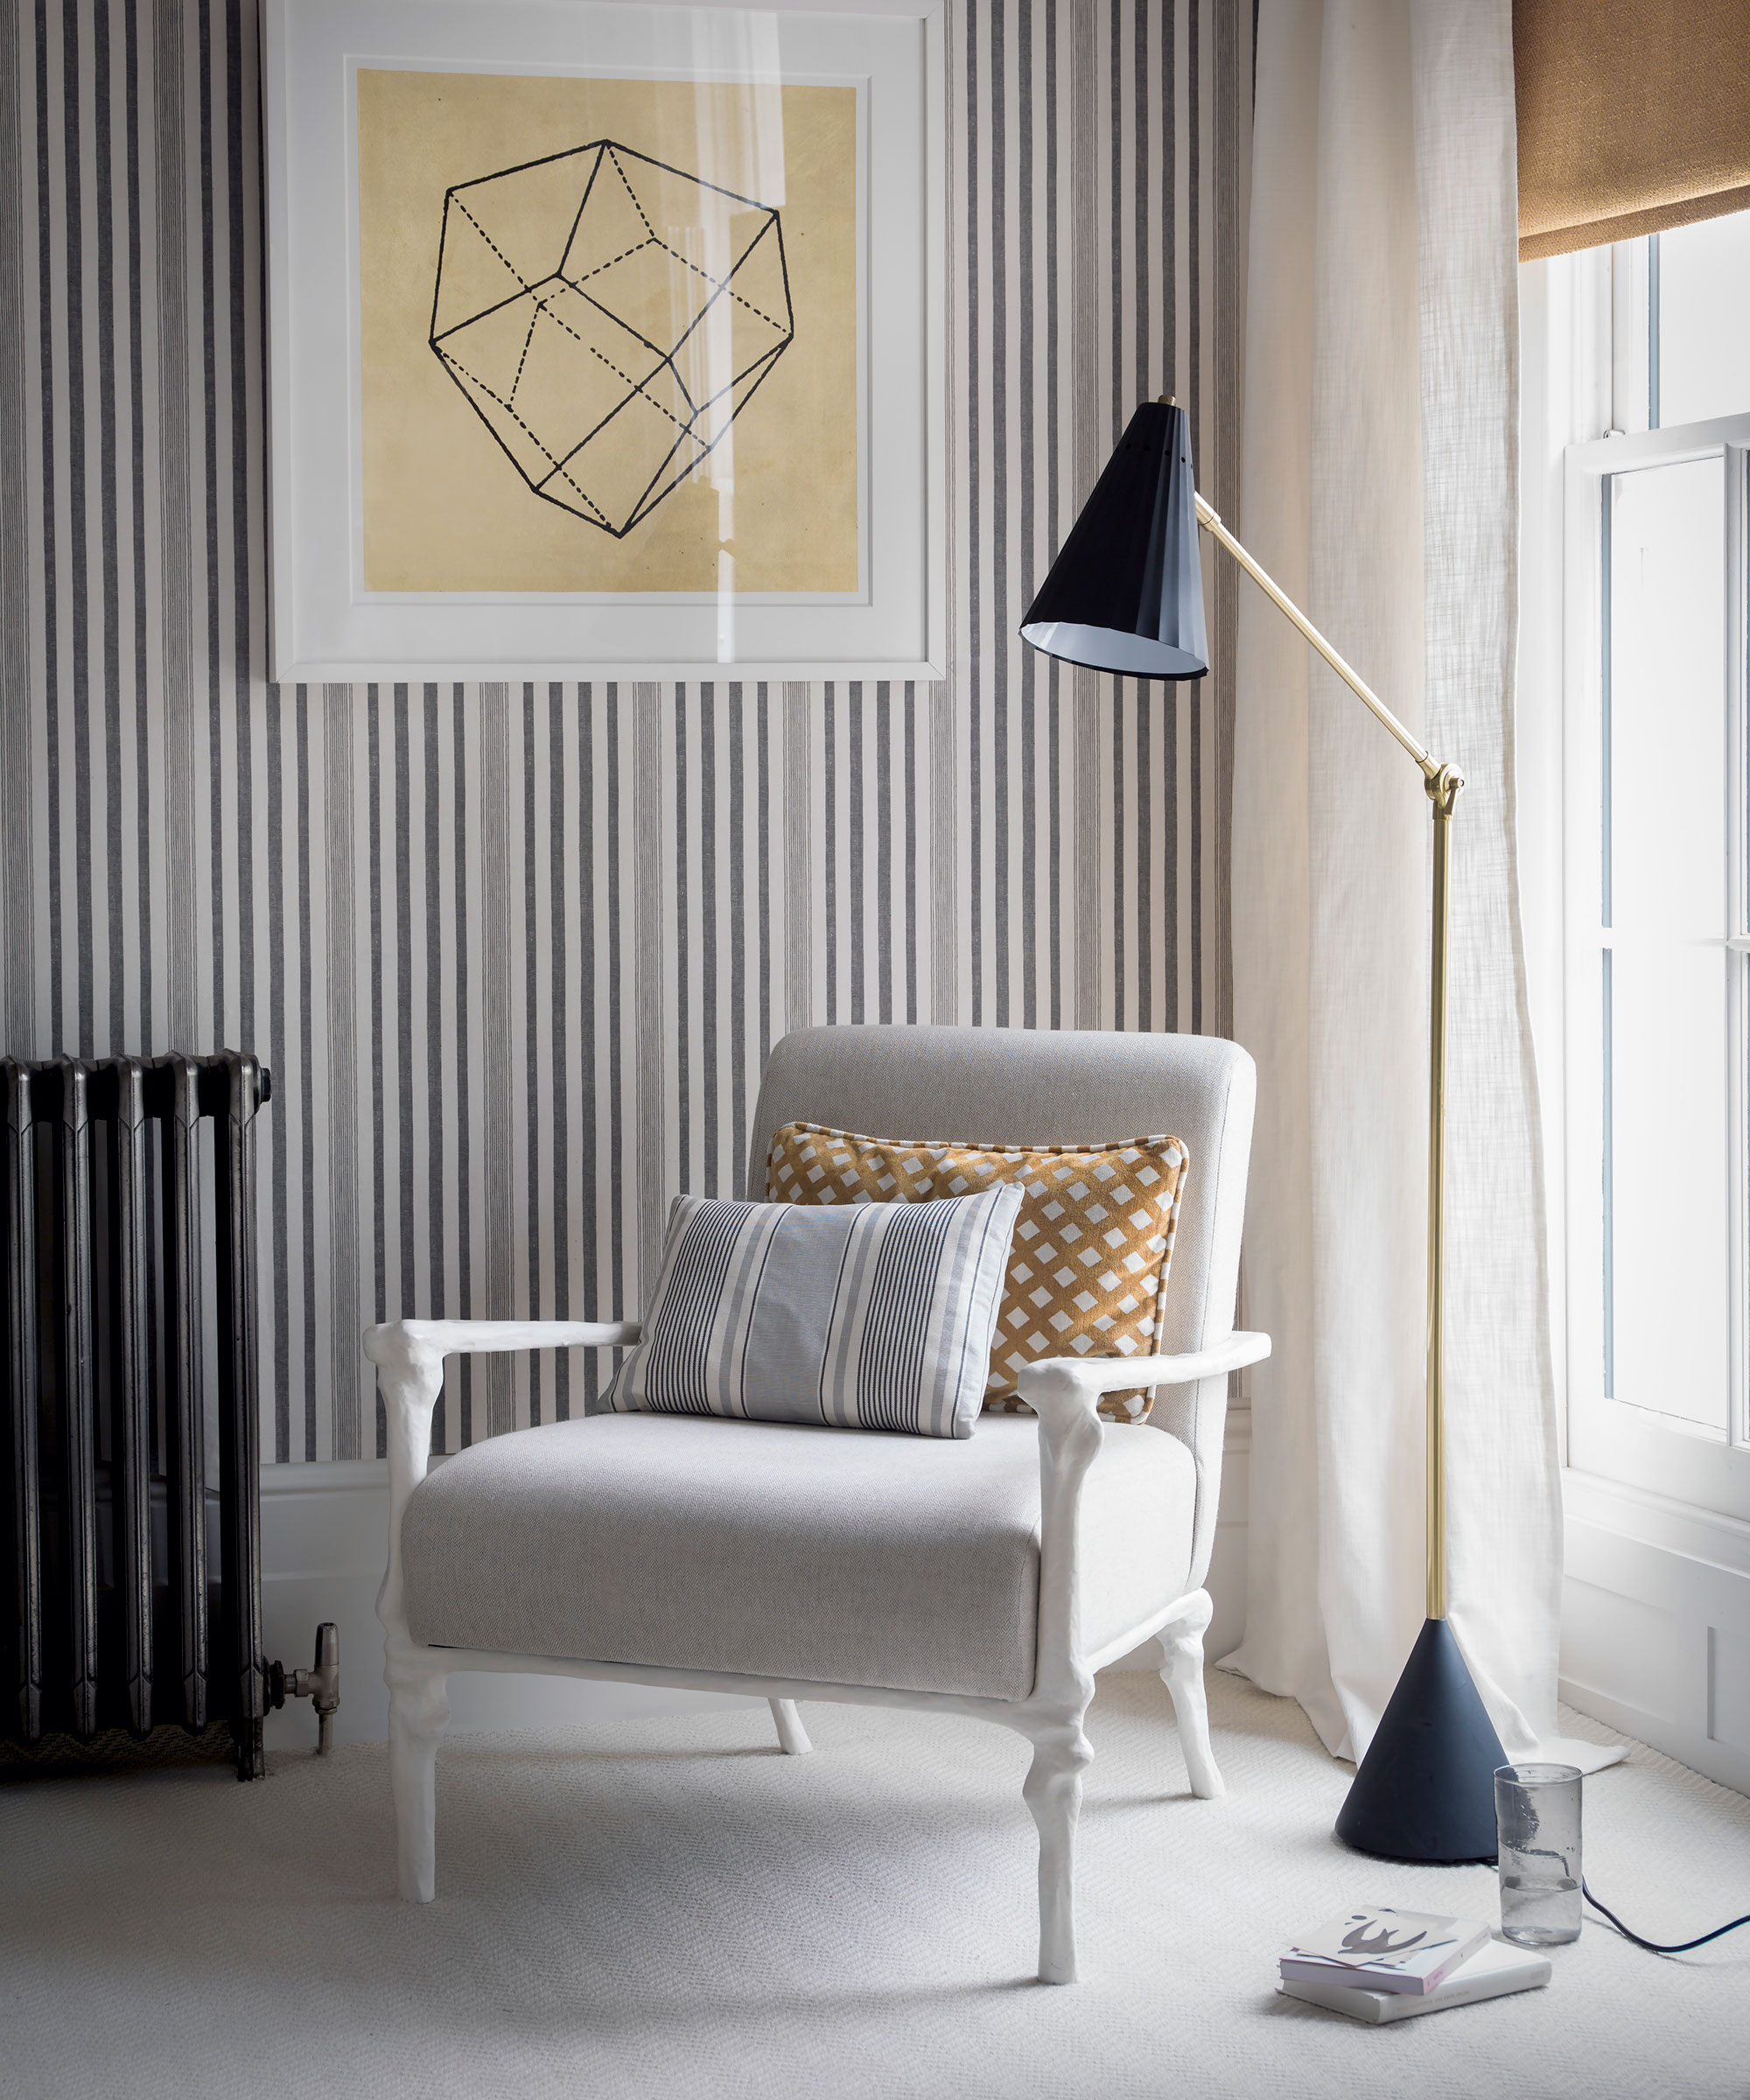 An example of bedroom lighting ideas showing a black floor lamp next to an armchair and striped wallpaper